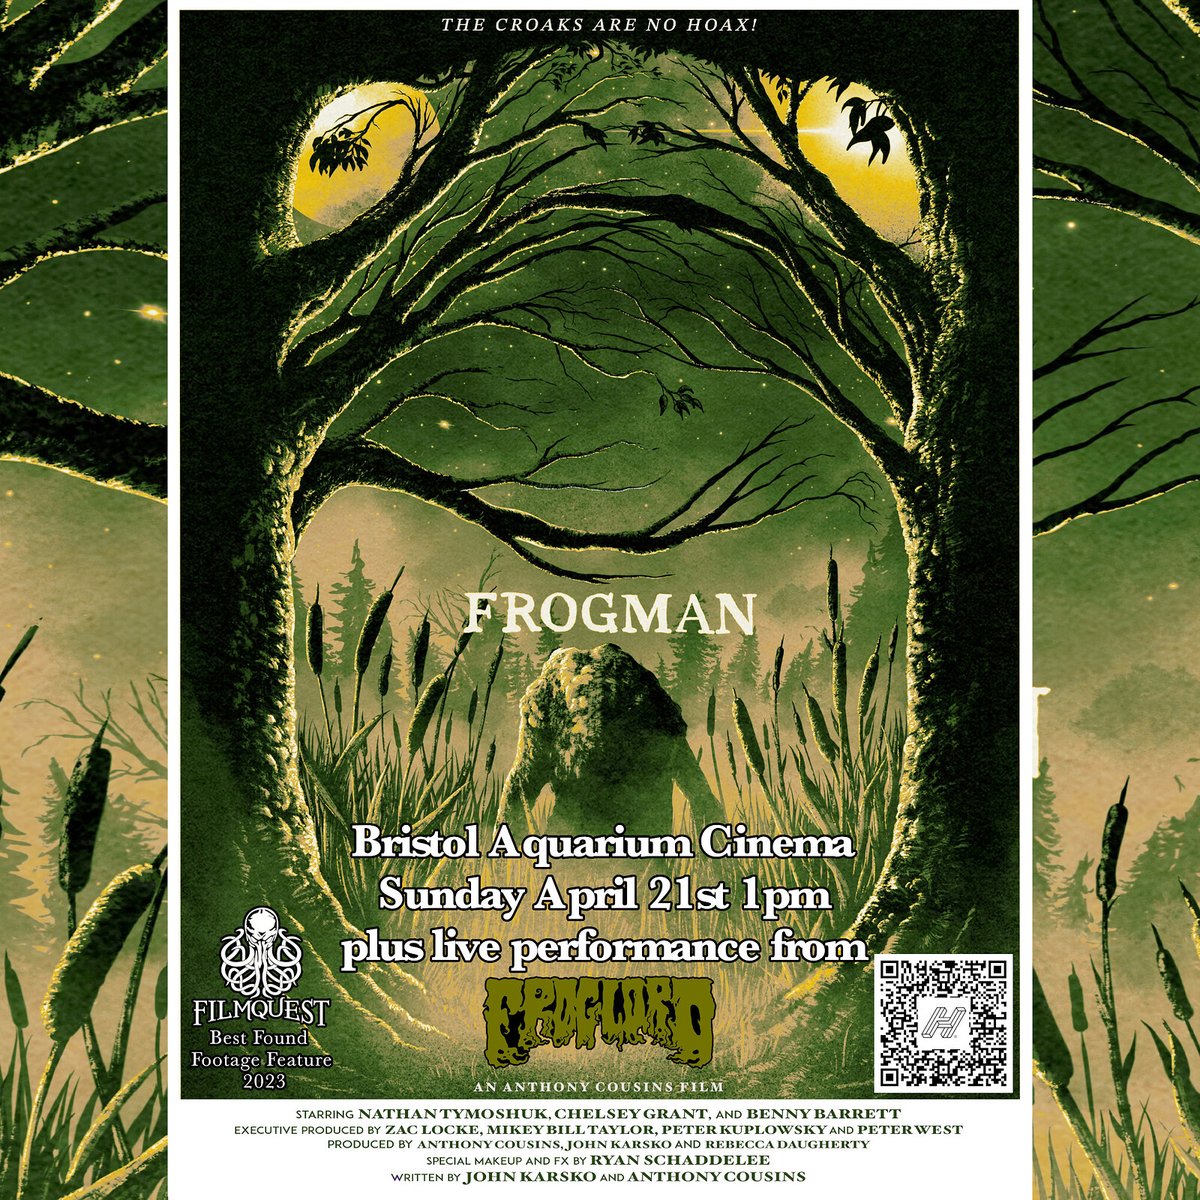 In the summer of 1999, Dallas Kyle captured footage of a mythical creature, but no one believed it was real. On 21 April, you can experience the terror and the legend of Frogman for yourself at @BristolAquarium! PLUS a live performance by FROGLORD! headfirstbristol.co.uk/whats-on/brist…